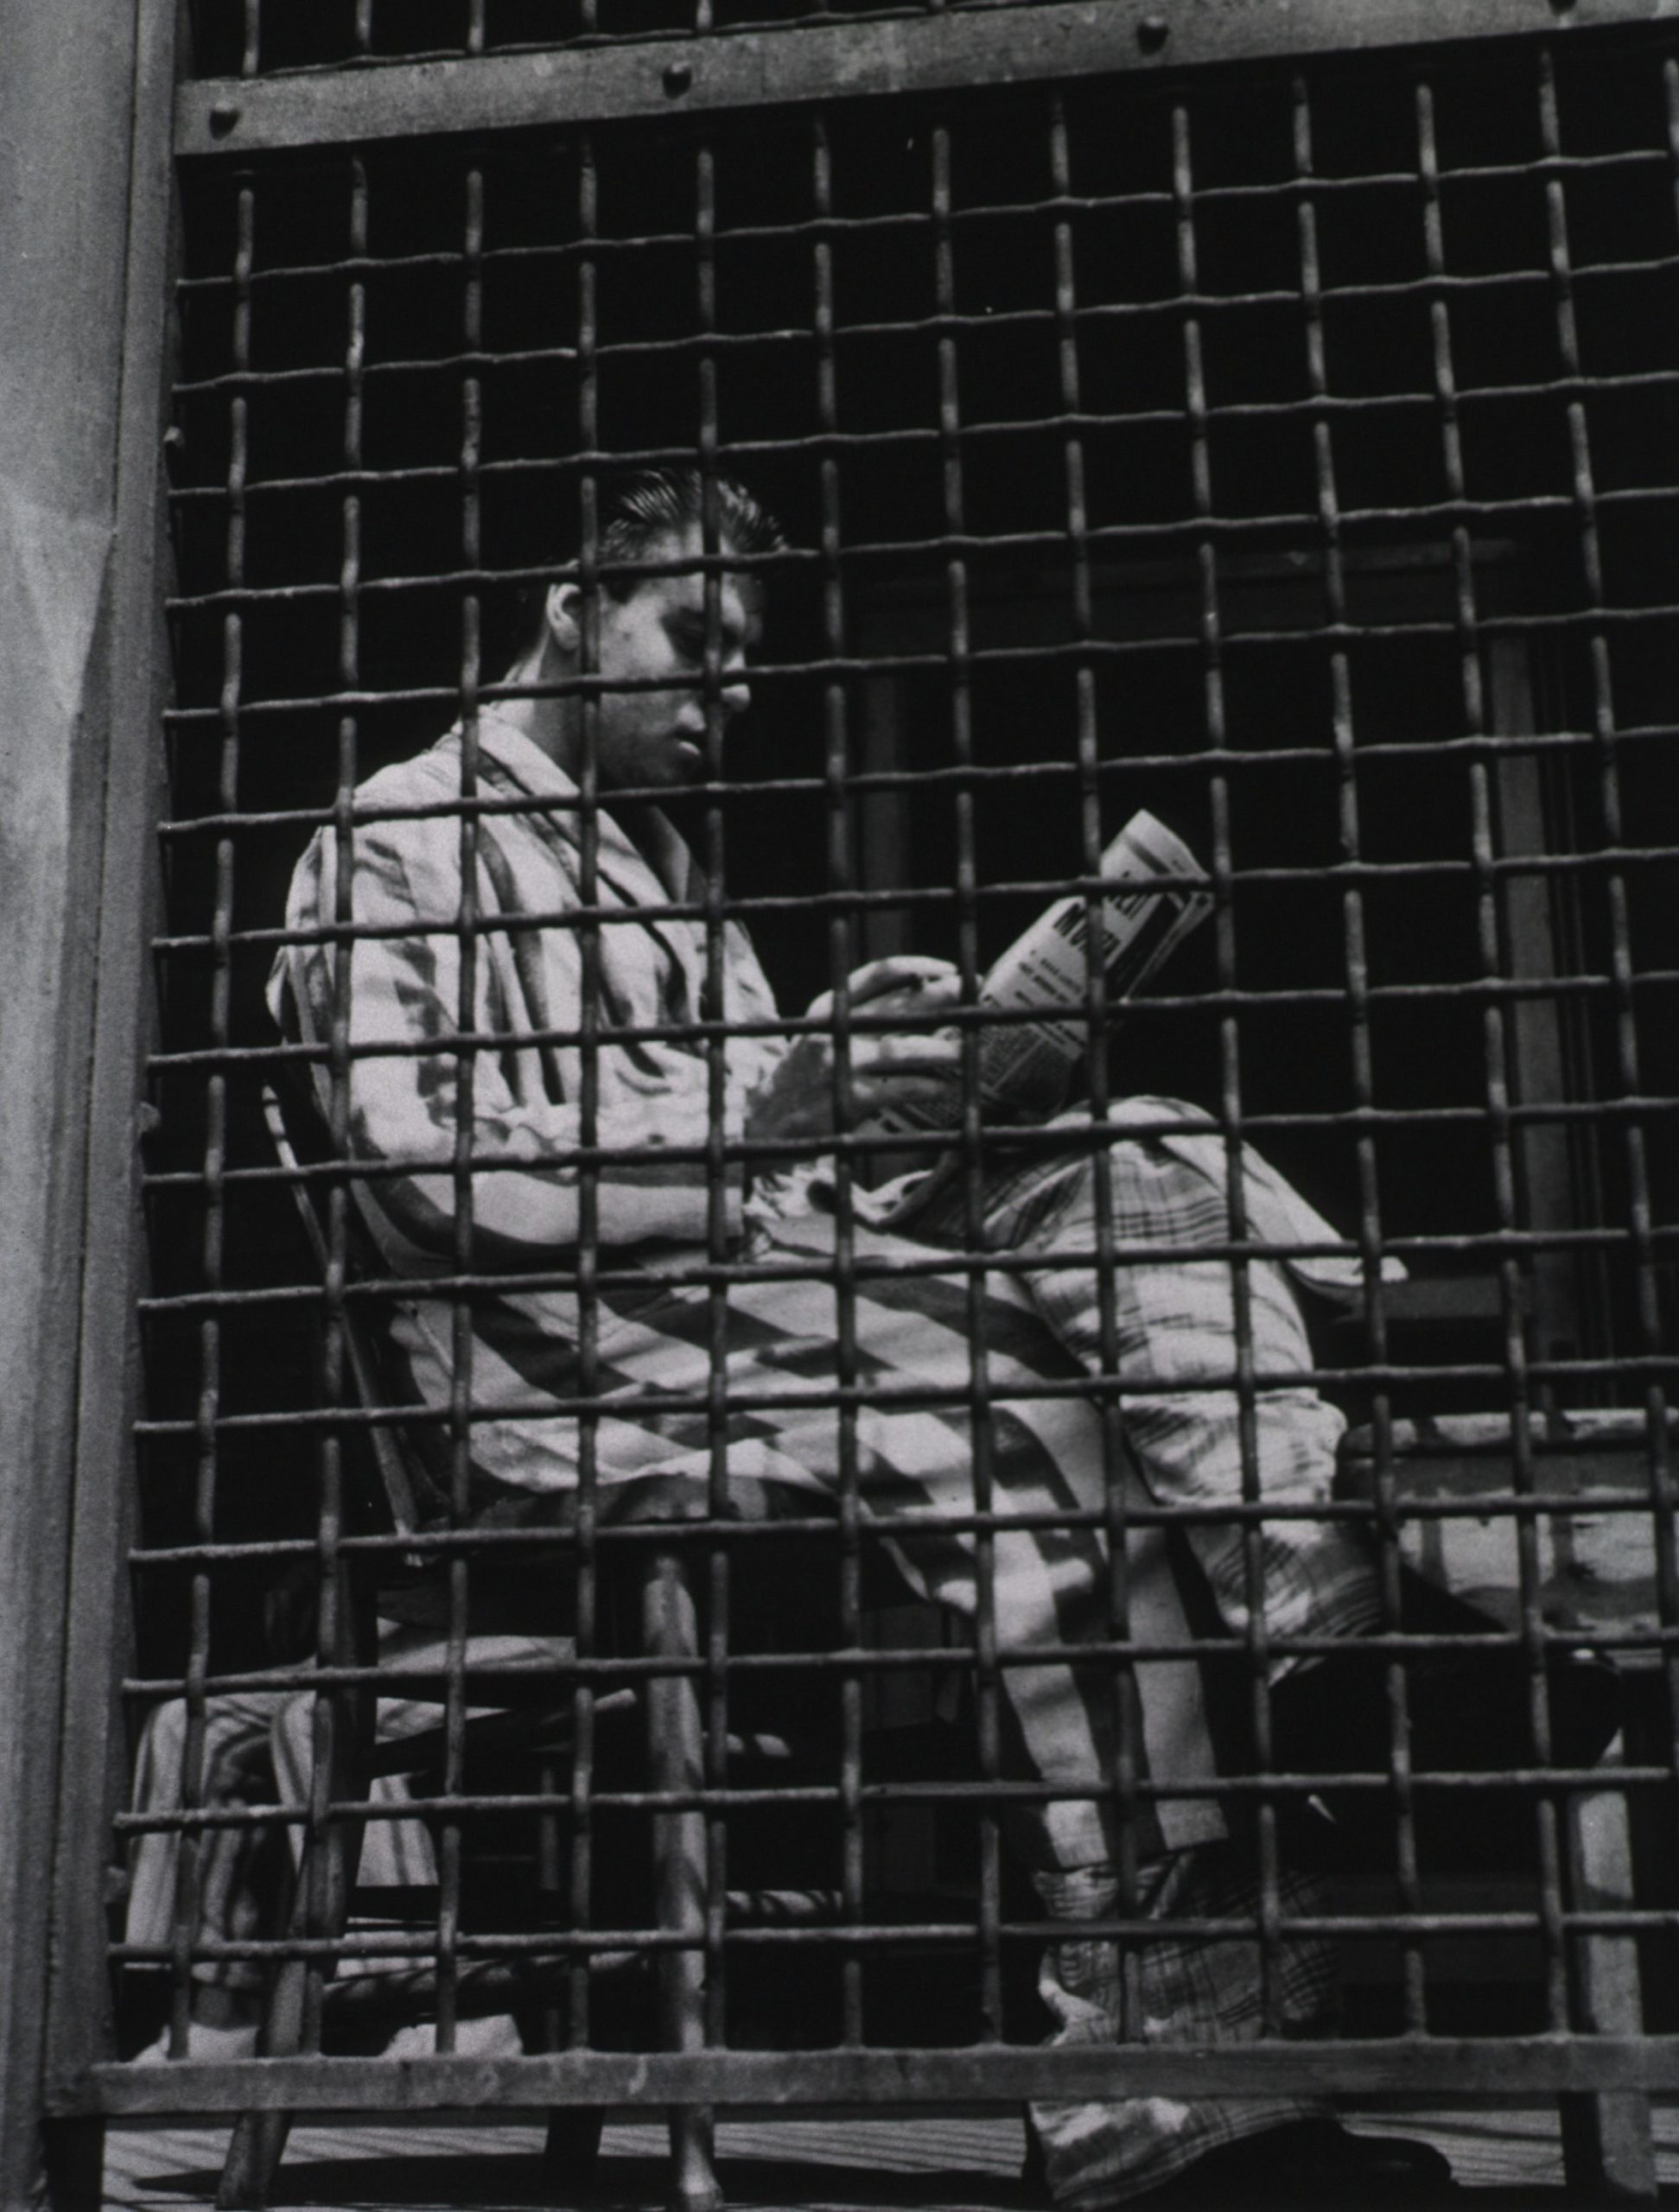 A man in pajamas and a robe is sitting and reading a newspaper behind a caged door in quarantine detention. Ellis Island, c 1930 h/t: NLM